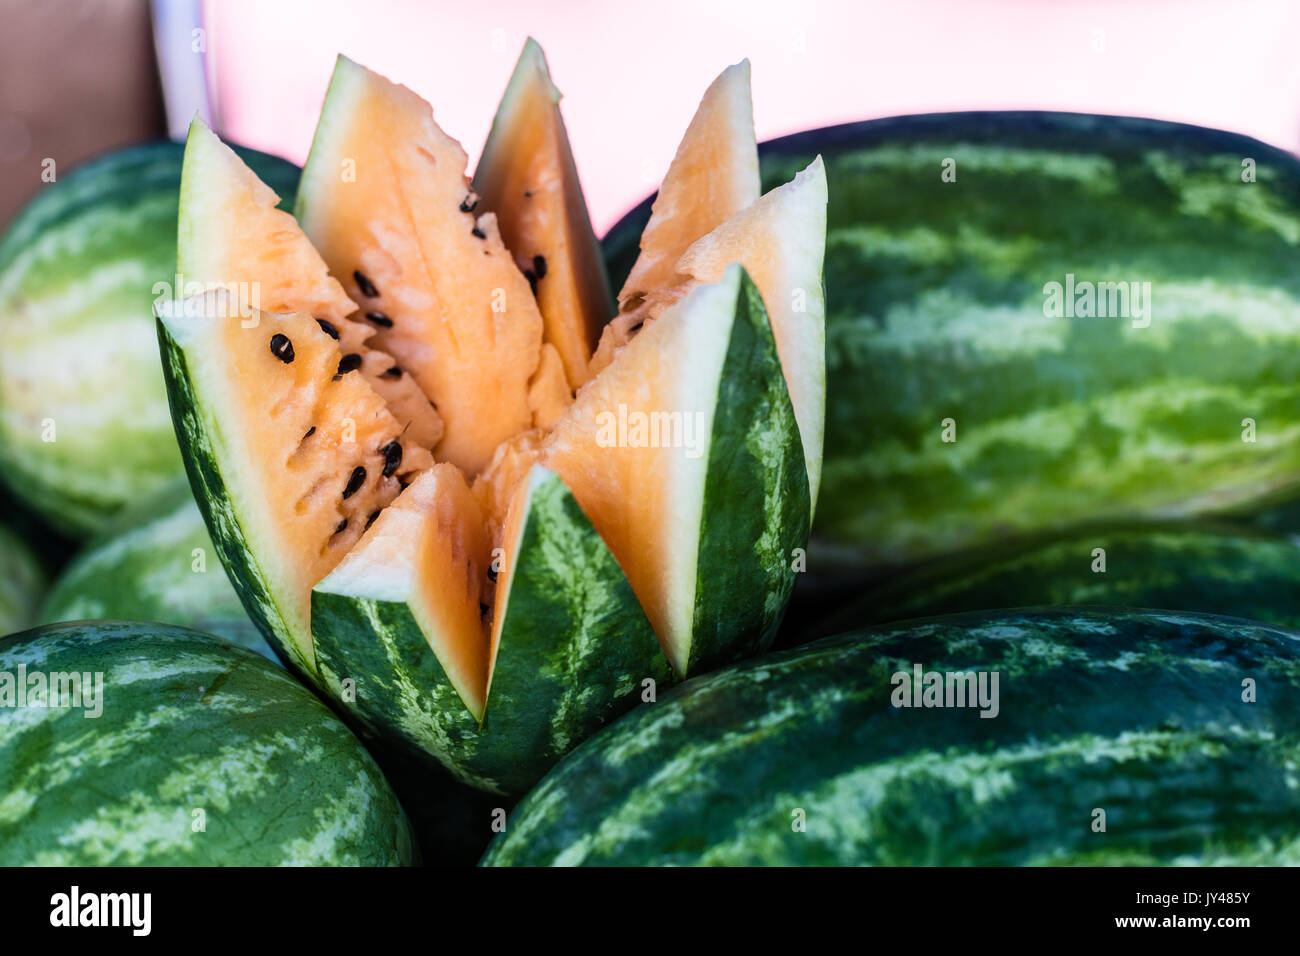 A sliced yellow watermelon at a farmers market display. Stock Photo